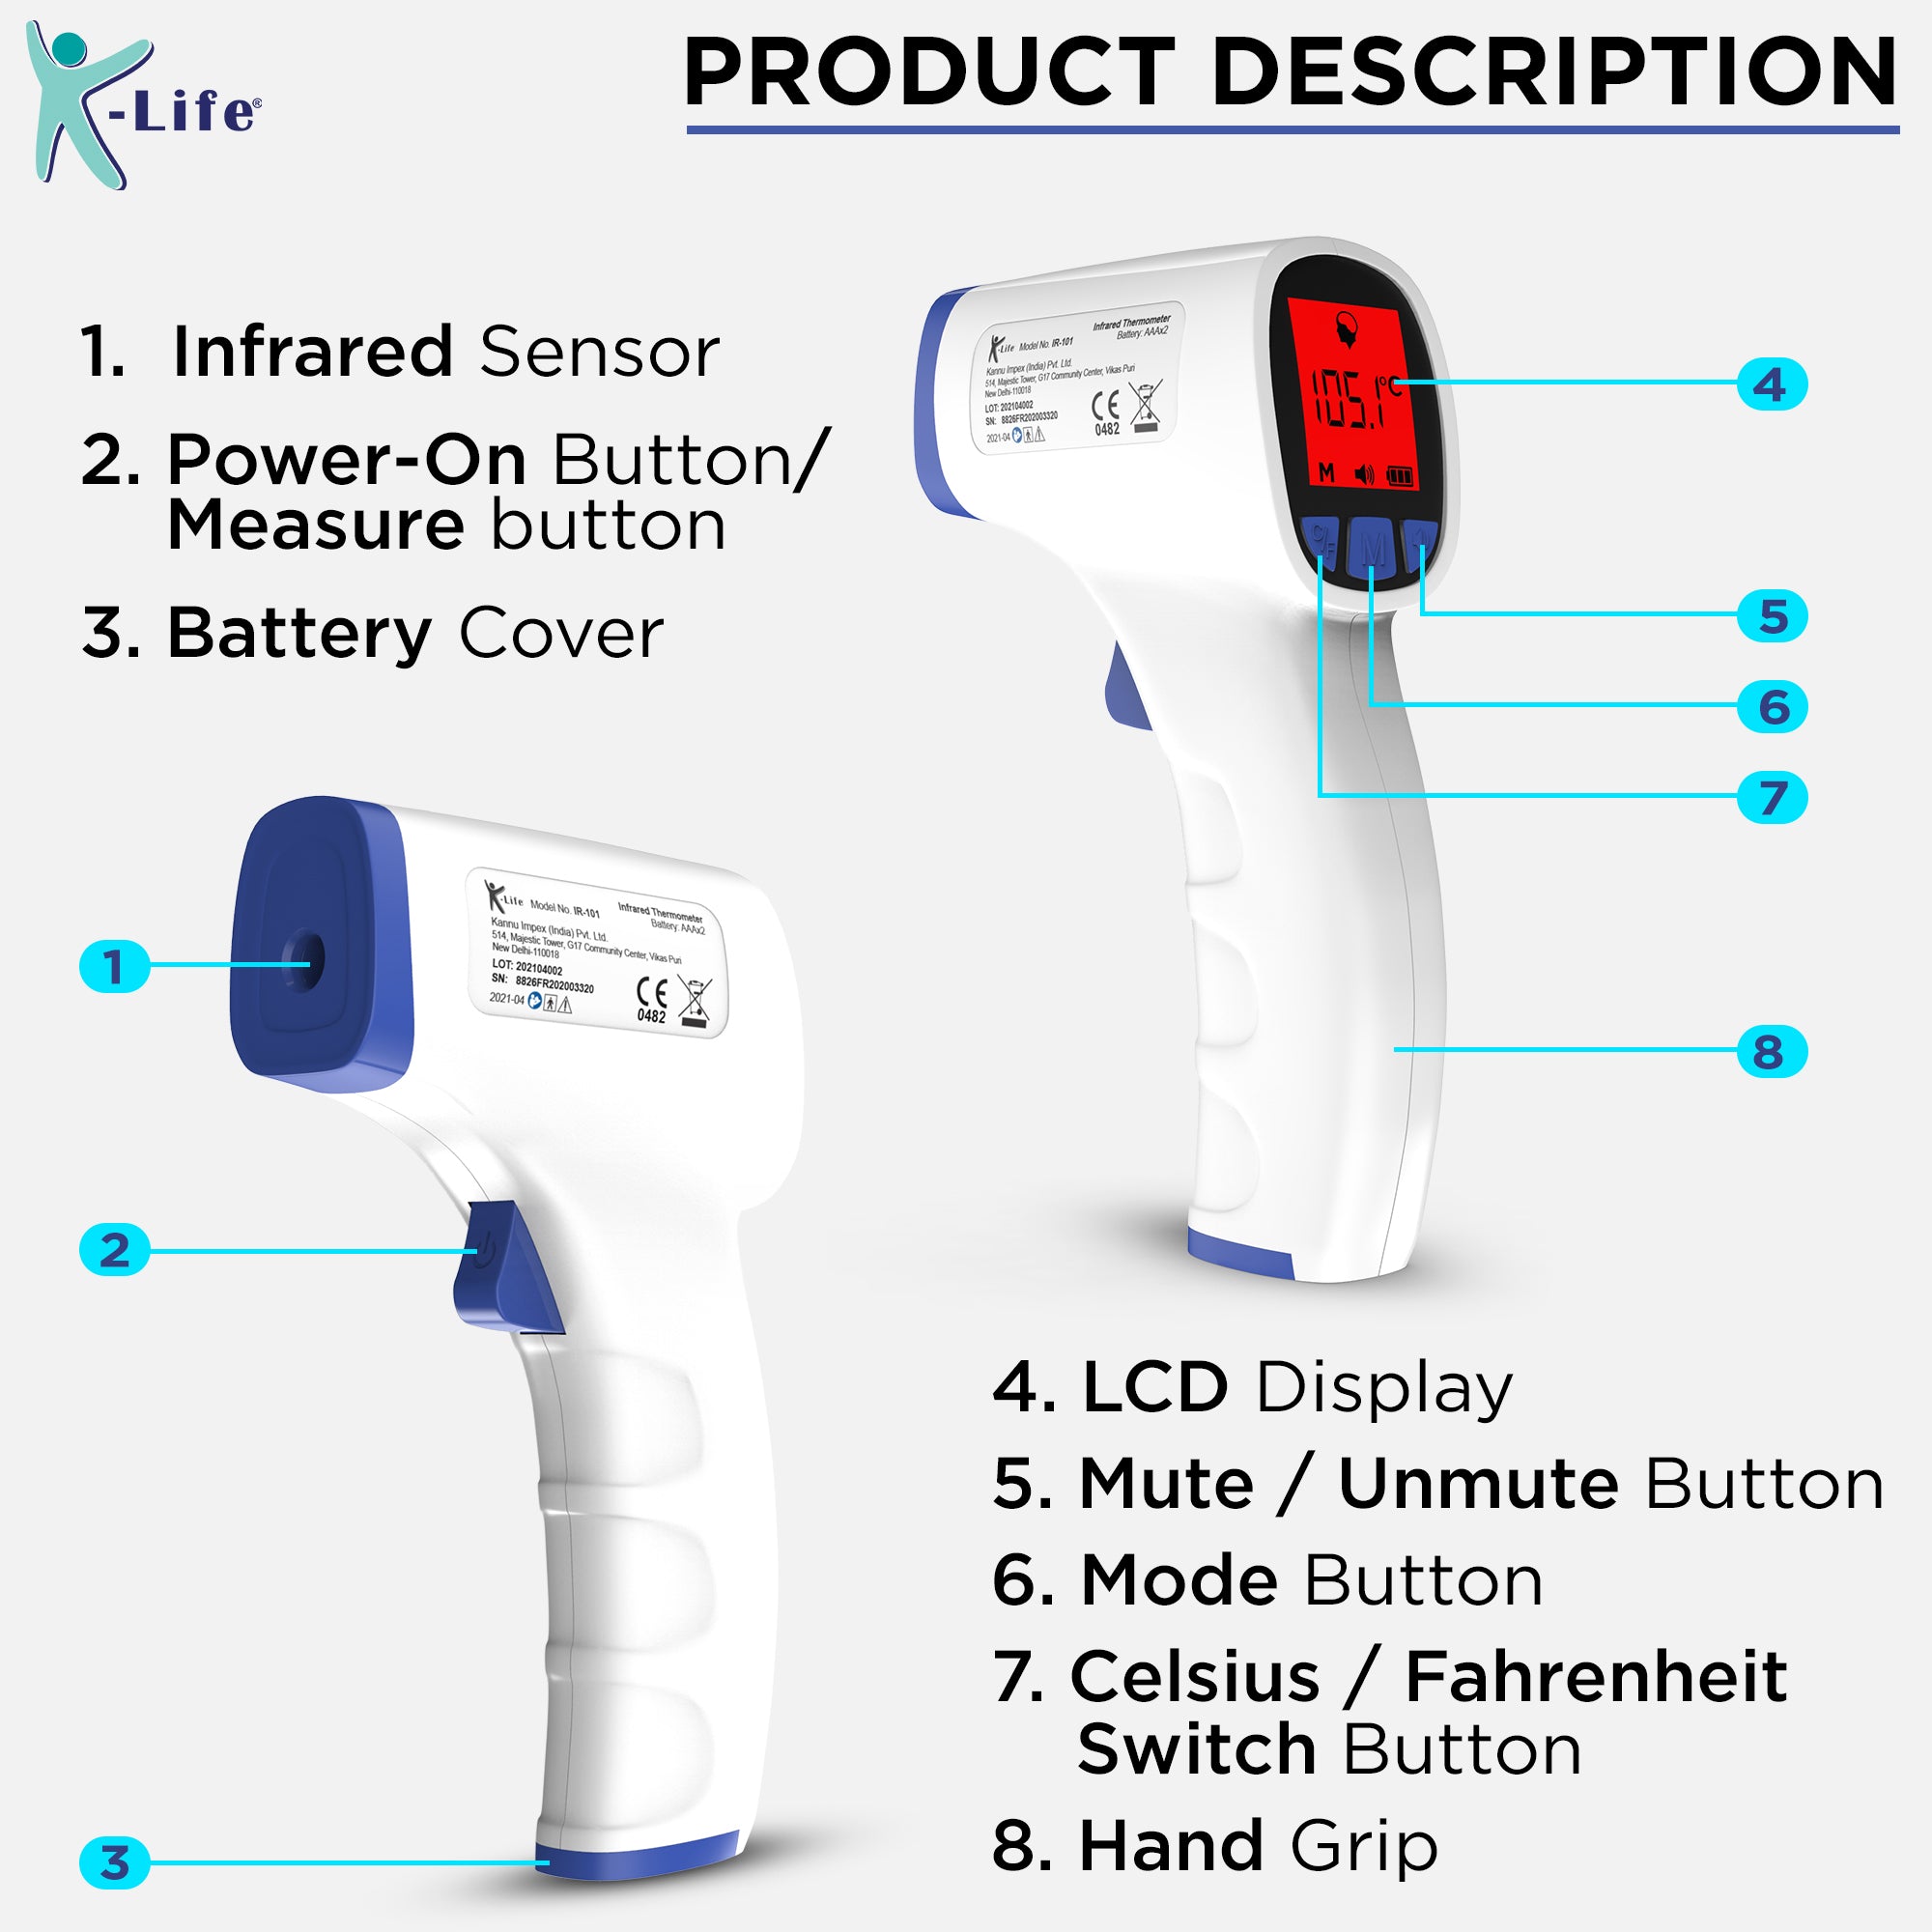 K-Life IR-101 Clincial digital Infrared Non Contact Gun Thermometer for fever Body temperature with Free Storage Pouch (White)